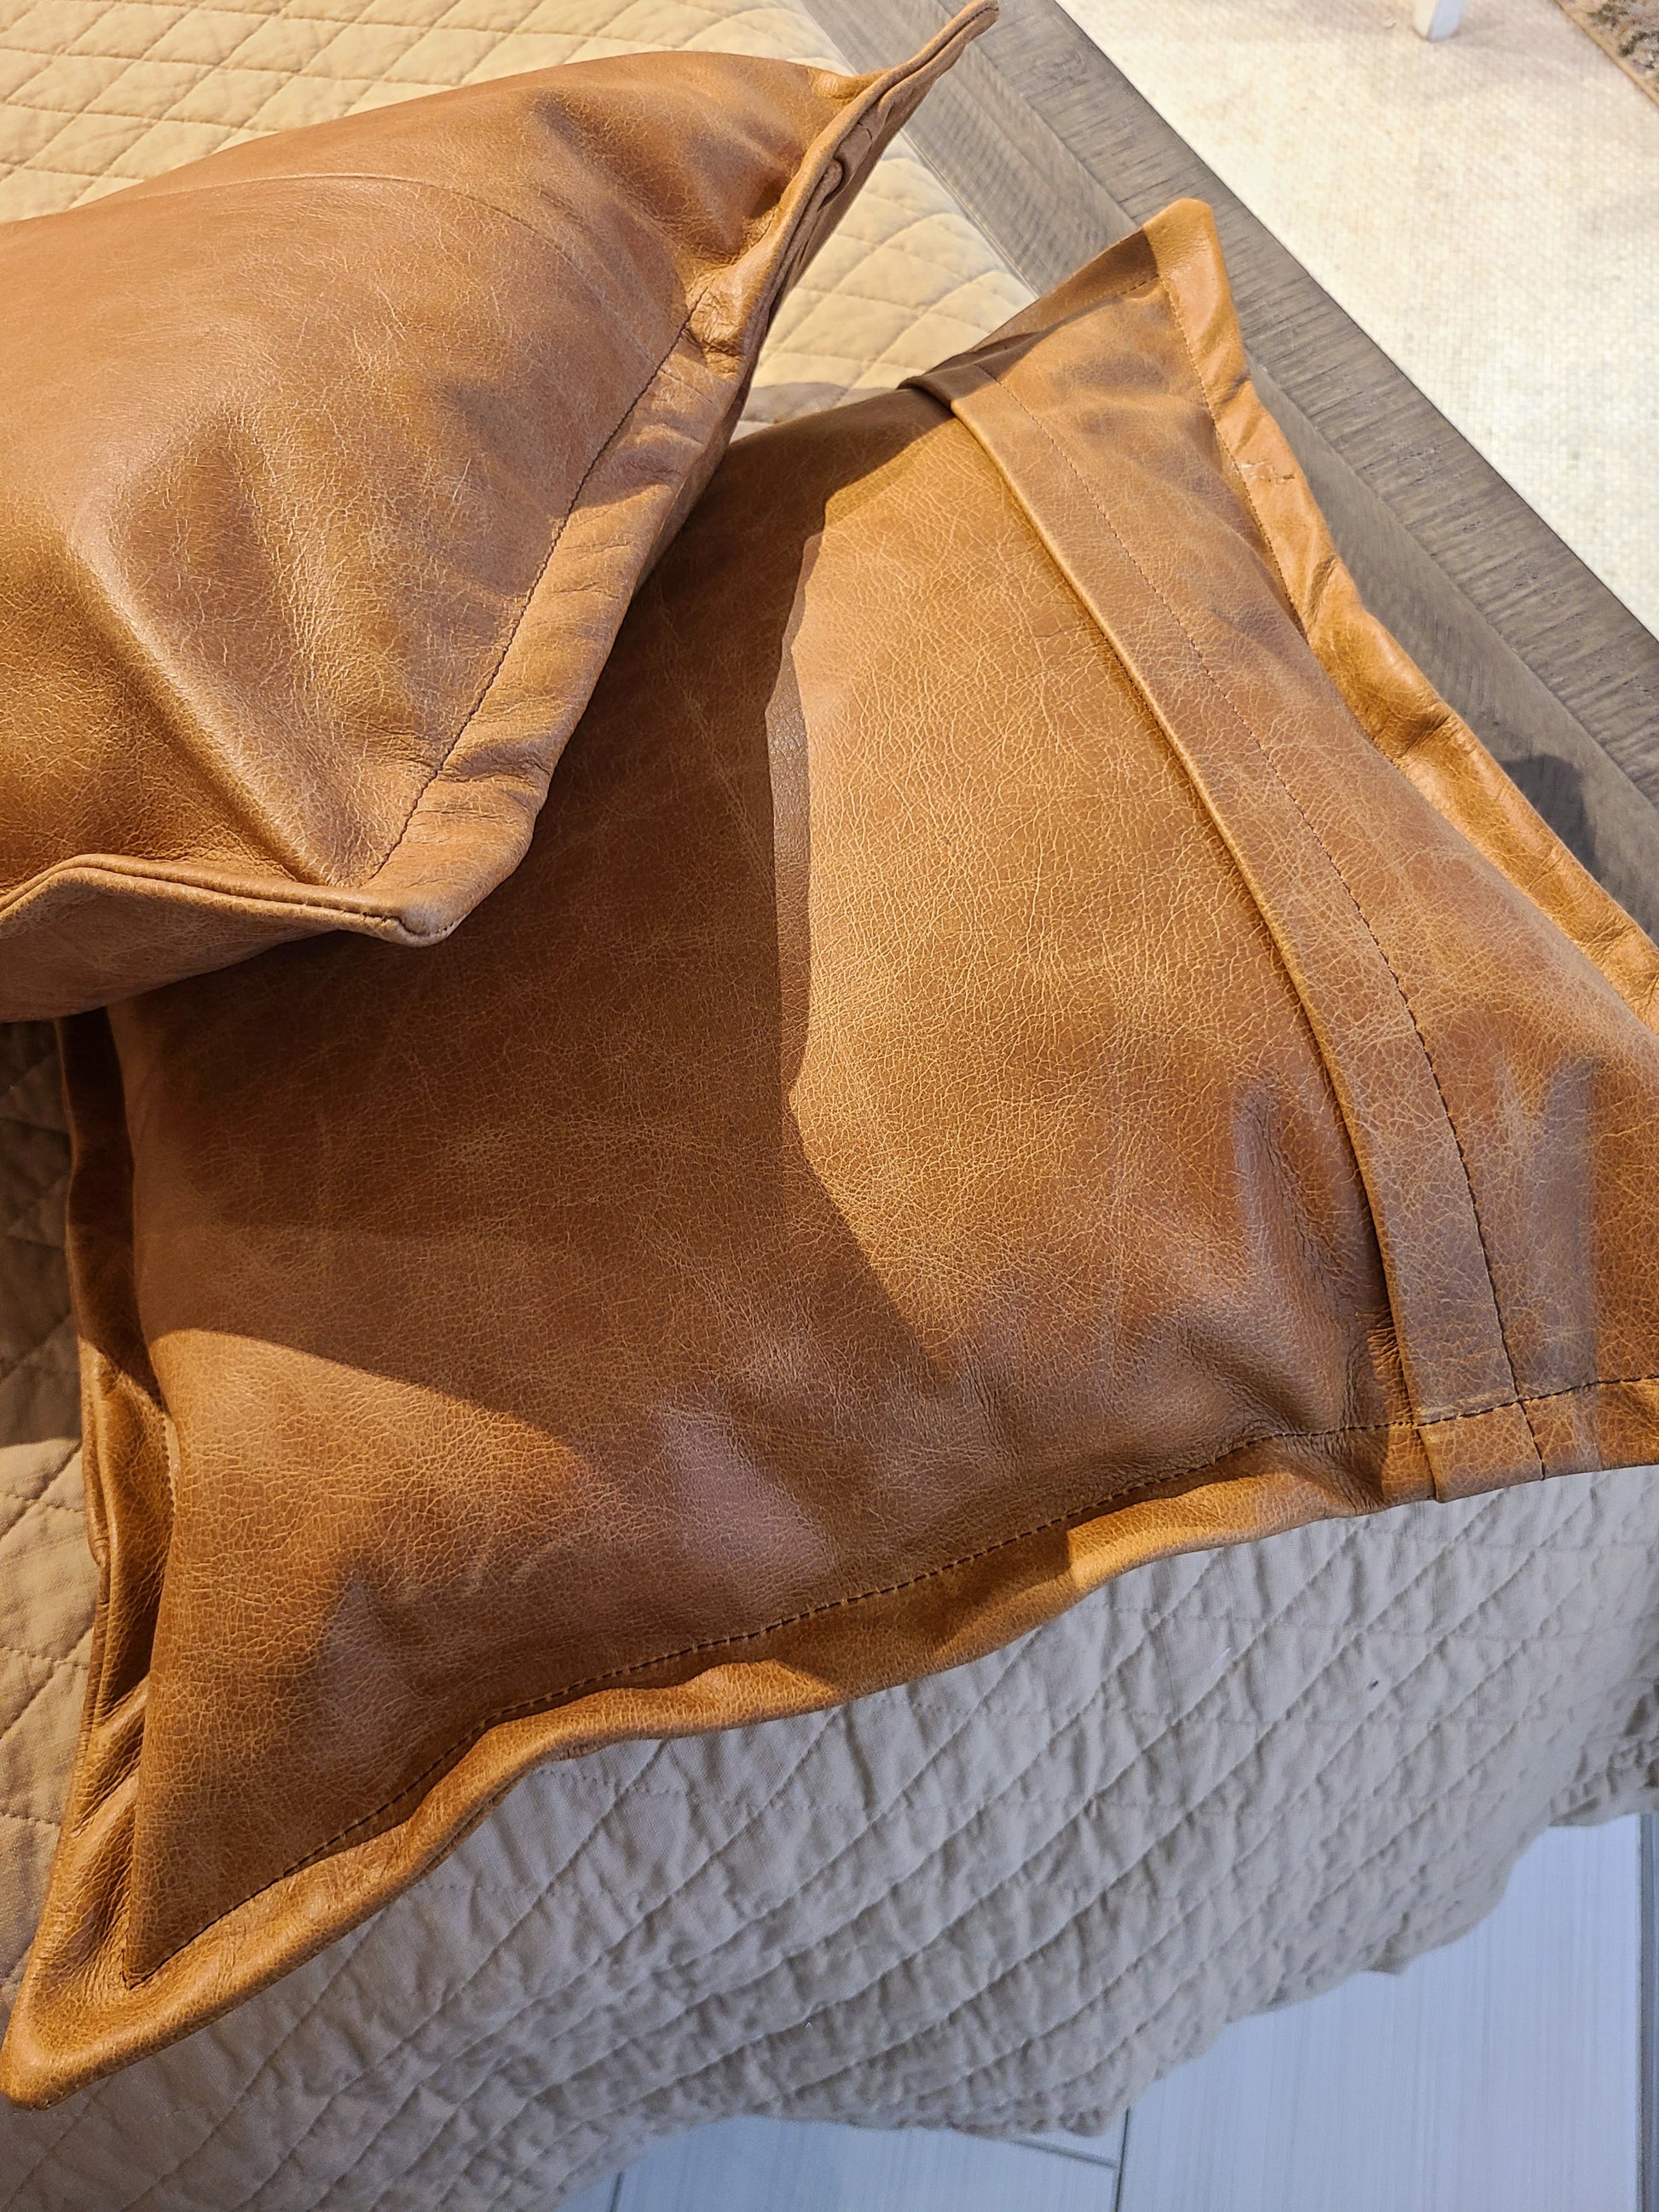 100% Lambskin Leather Caramel Brown Throw Pillow Cover - 24 x 24-Status Co. Leather Studio